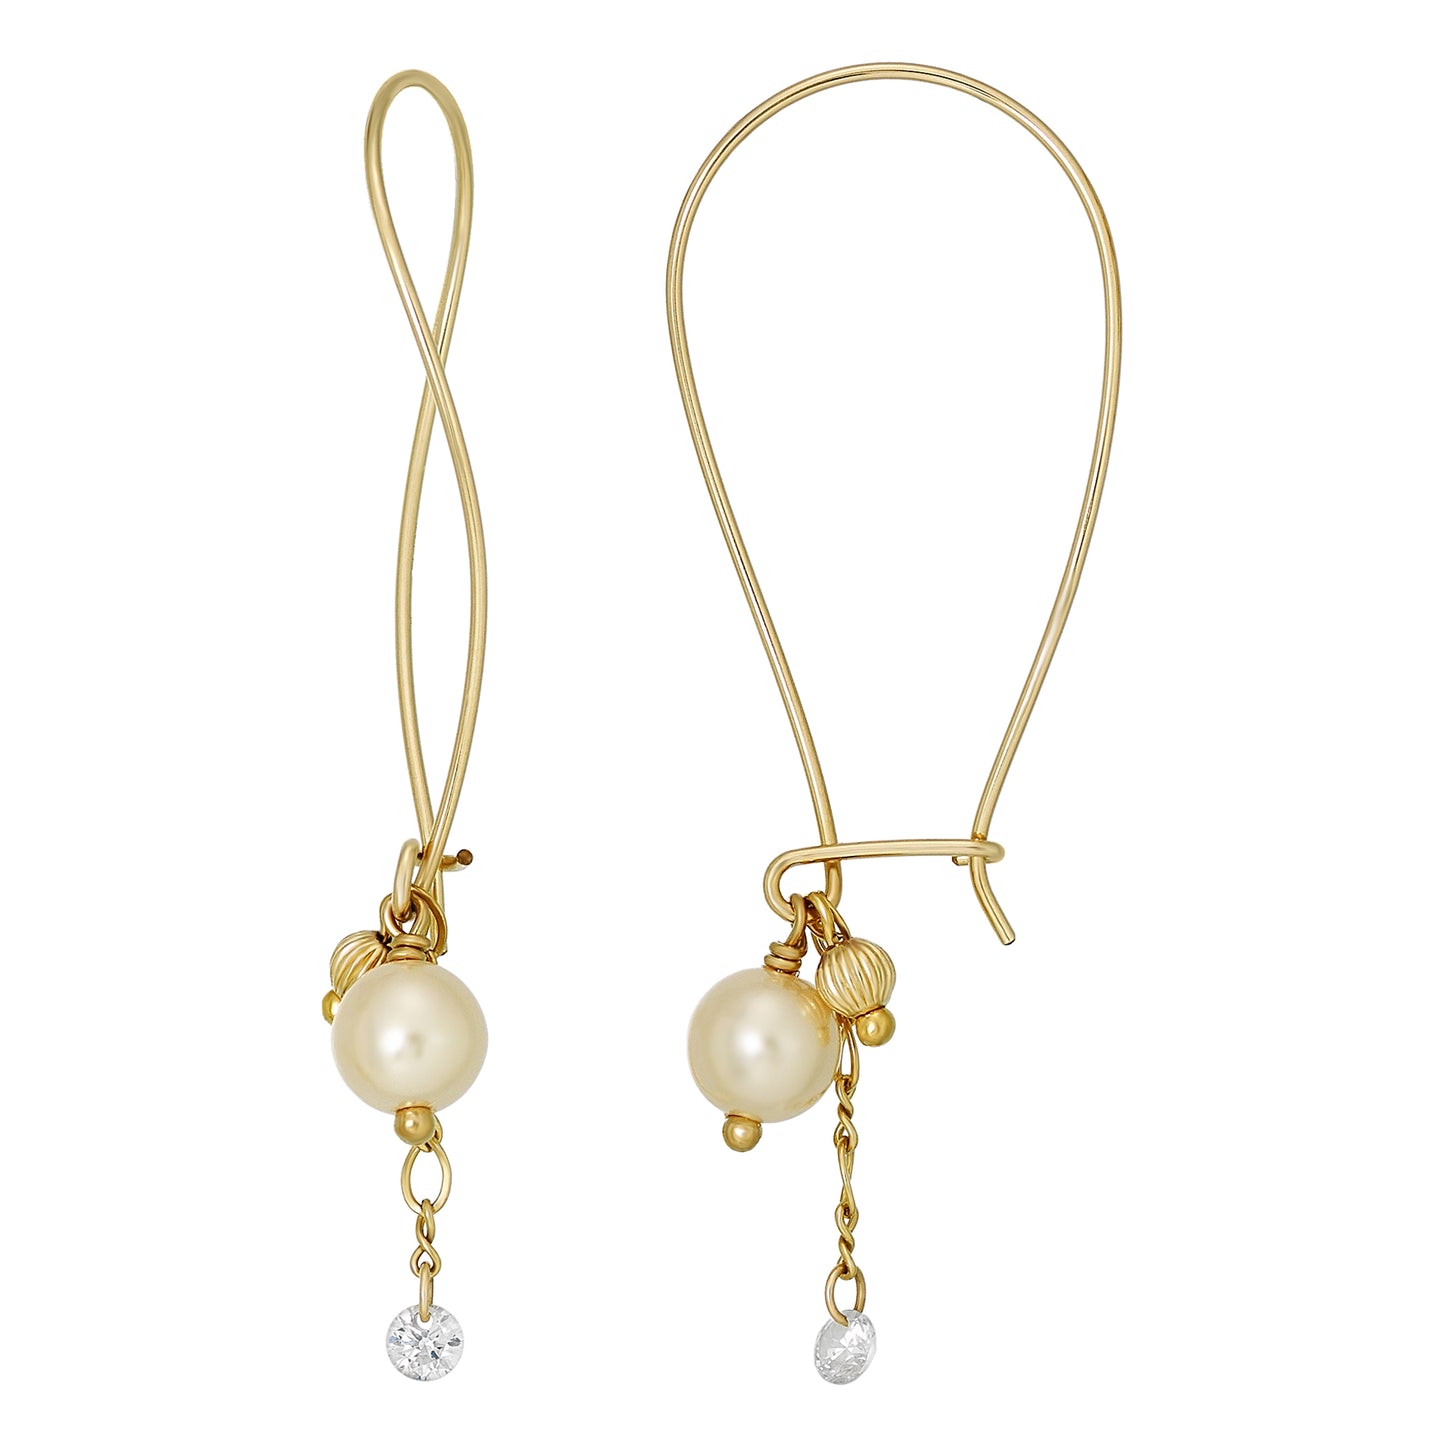 Gold Filled Pearl Wire Earrings - Product Image